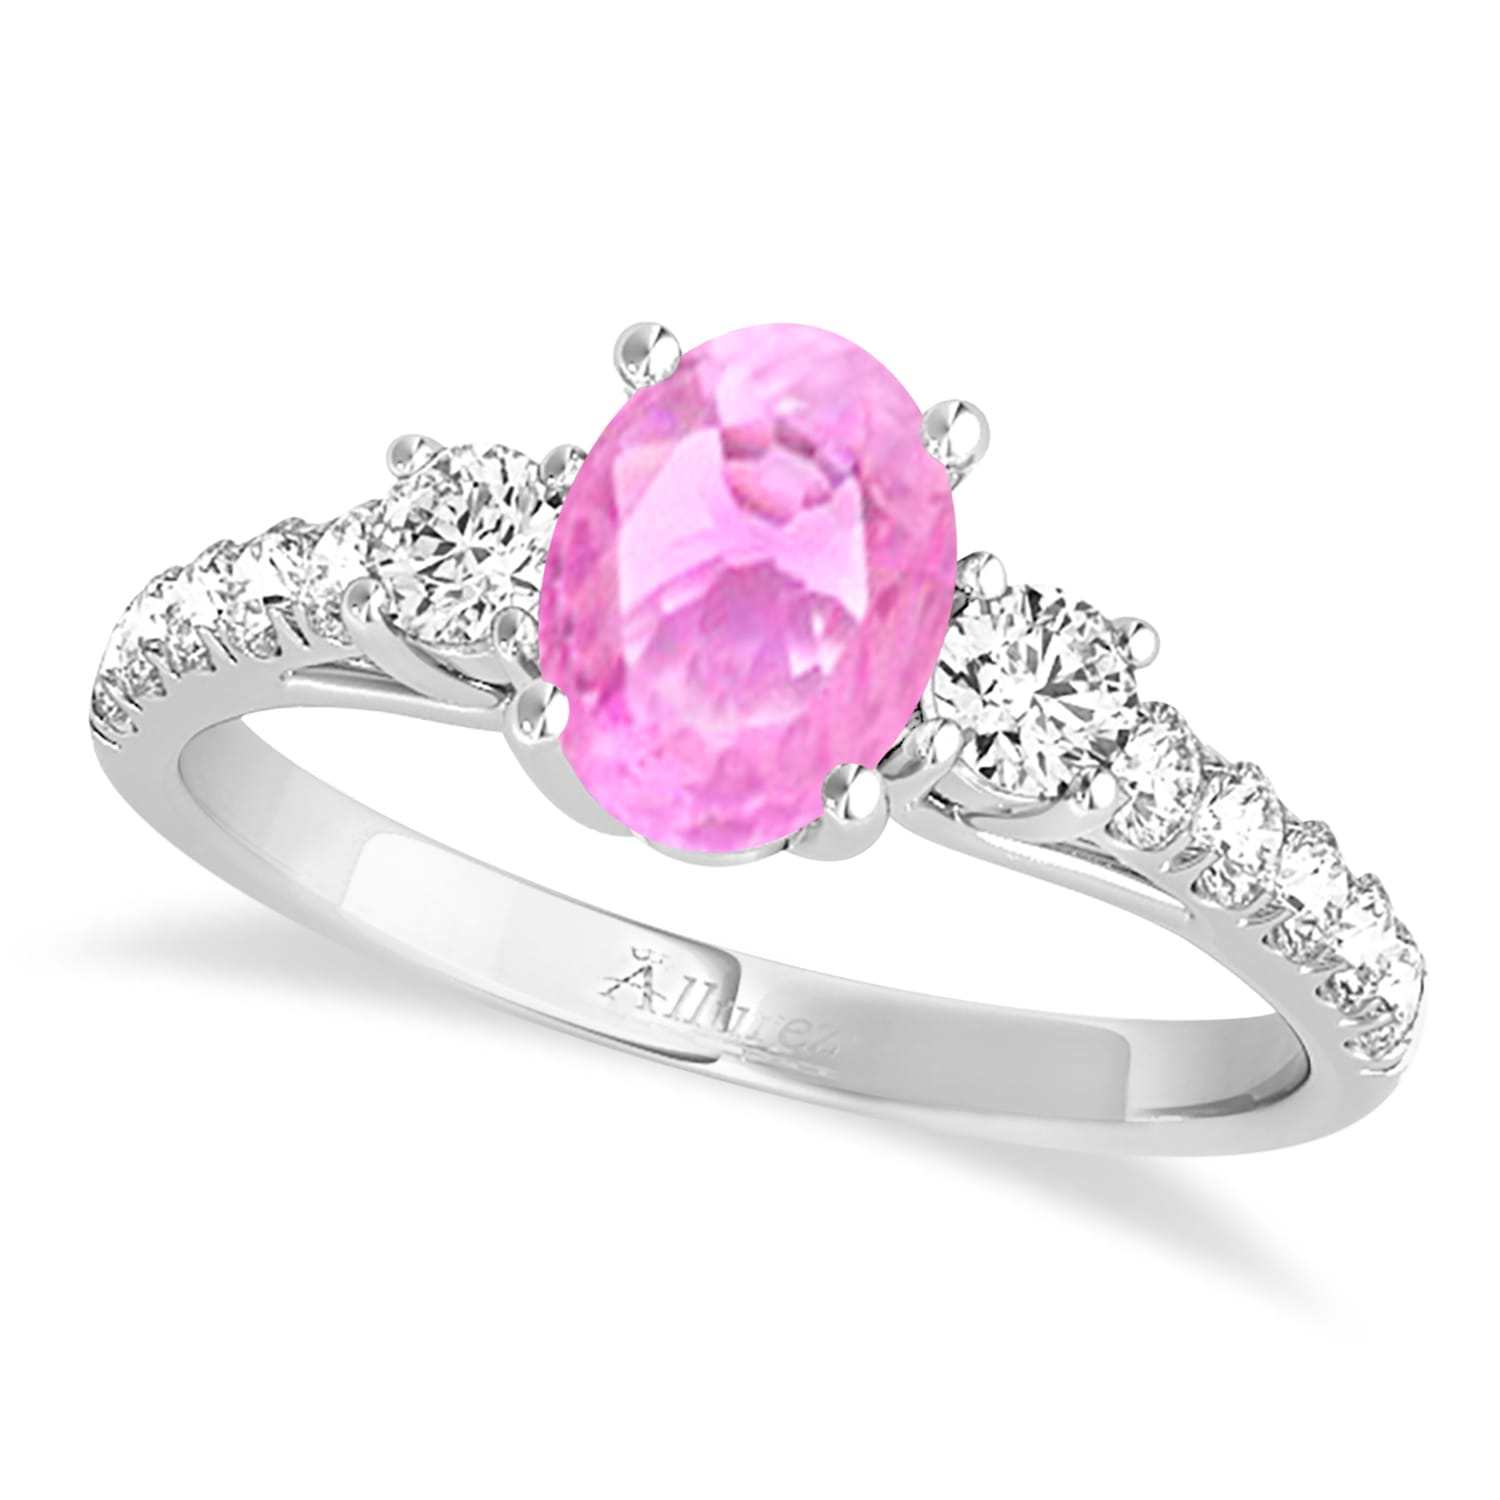 Oval Cut Pink Sapphire & Diamond Engagement Ring 18k White Gold (1.40ct)